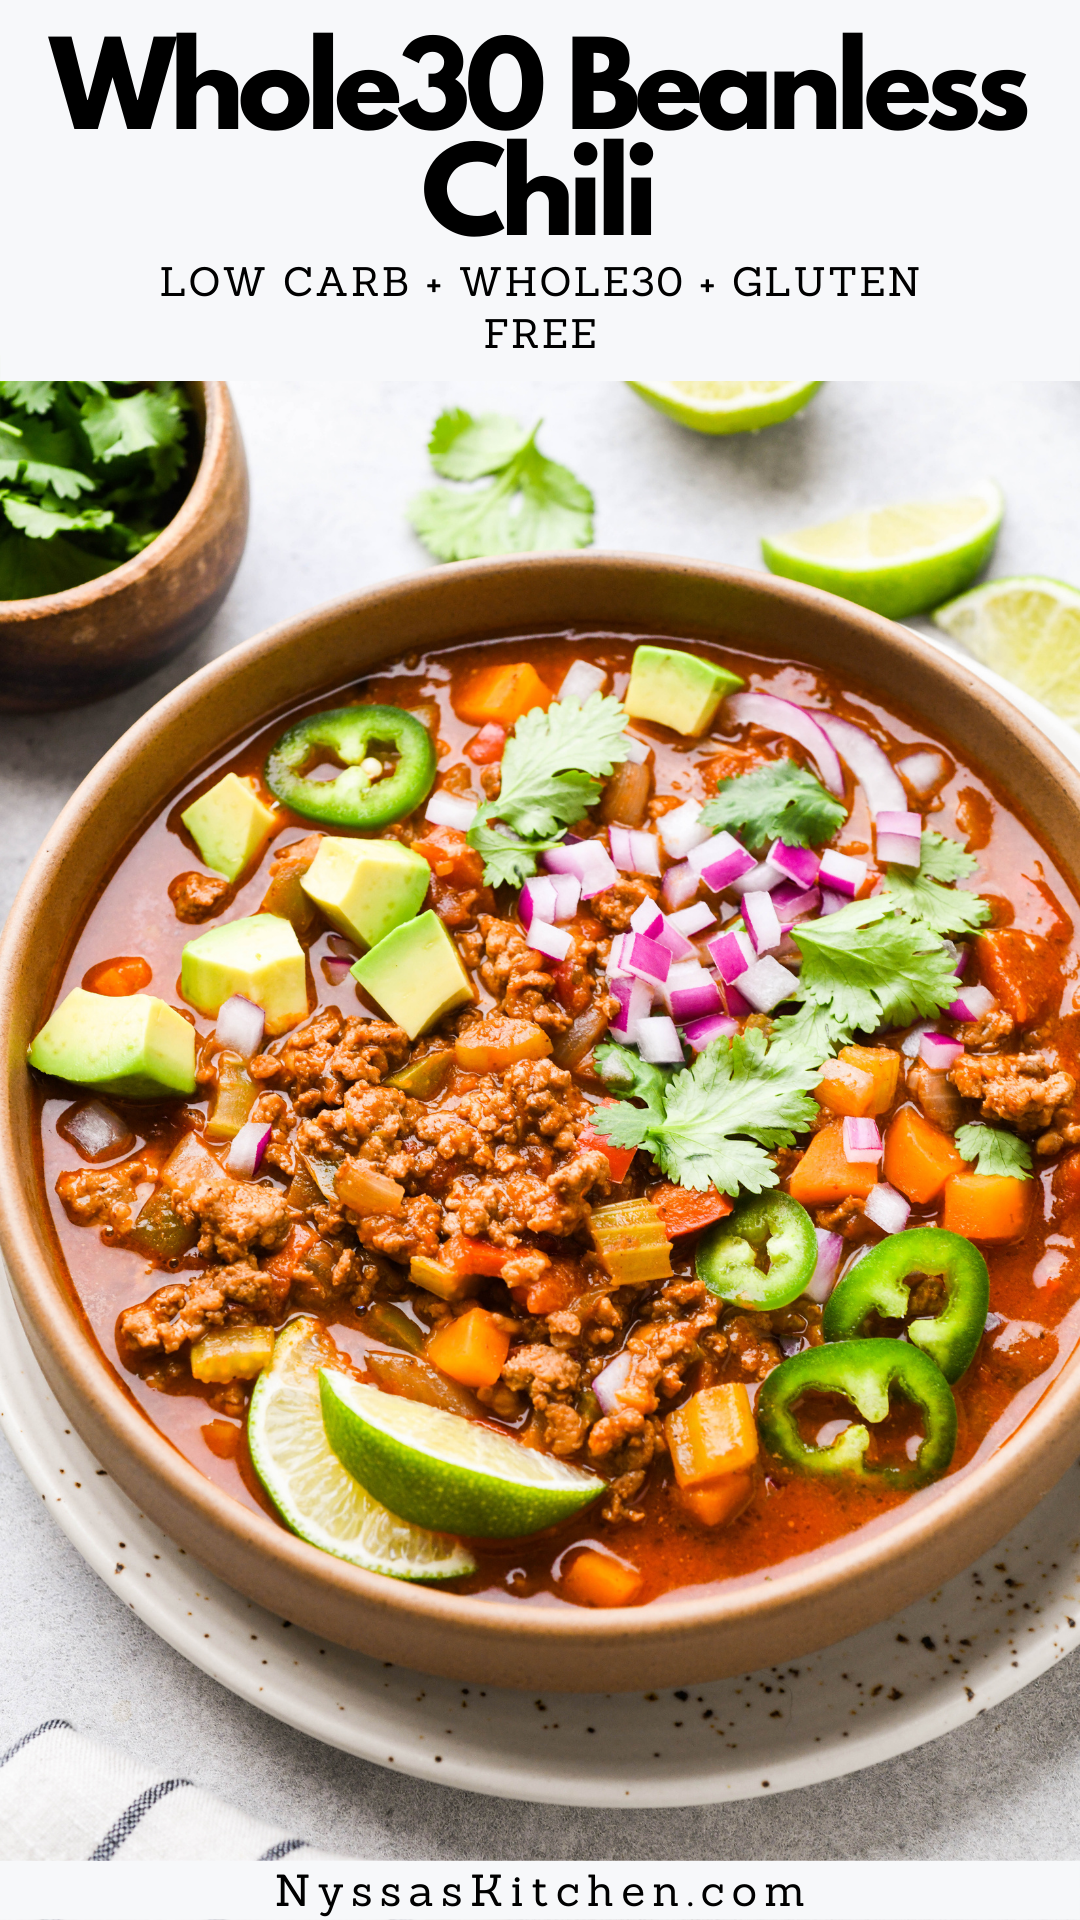 Simple and delicious Whole30 beanless chili is perfect for a cozy night in! Made with nourishing protein, a rainbow of healthy vegetables, and plenty of spices for deep and rich flavor. Easy to make and perfect for the whole family! Whole30, paleo, and gluten free.